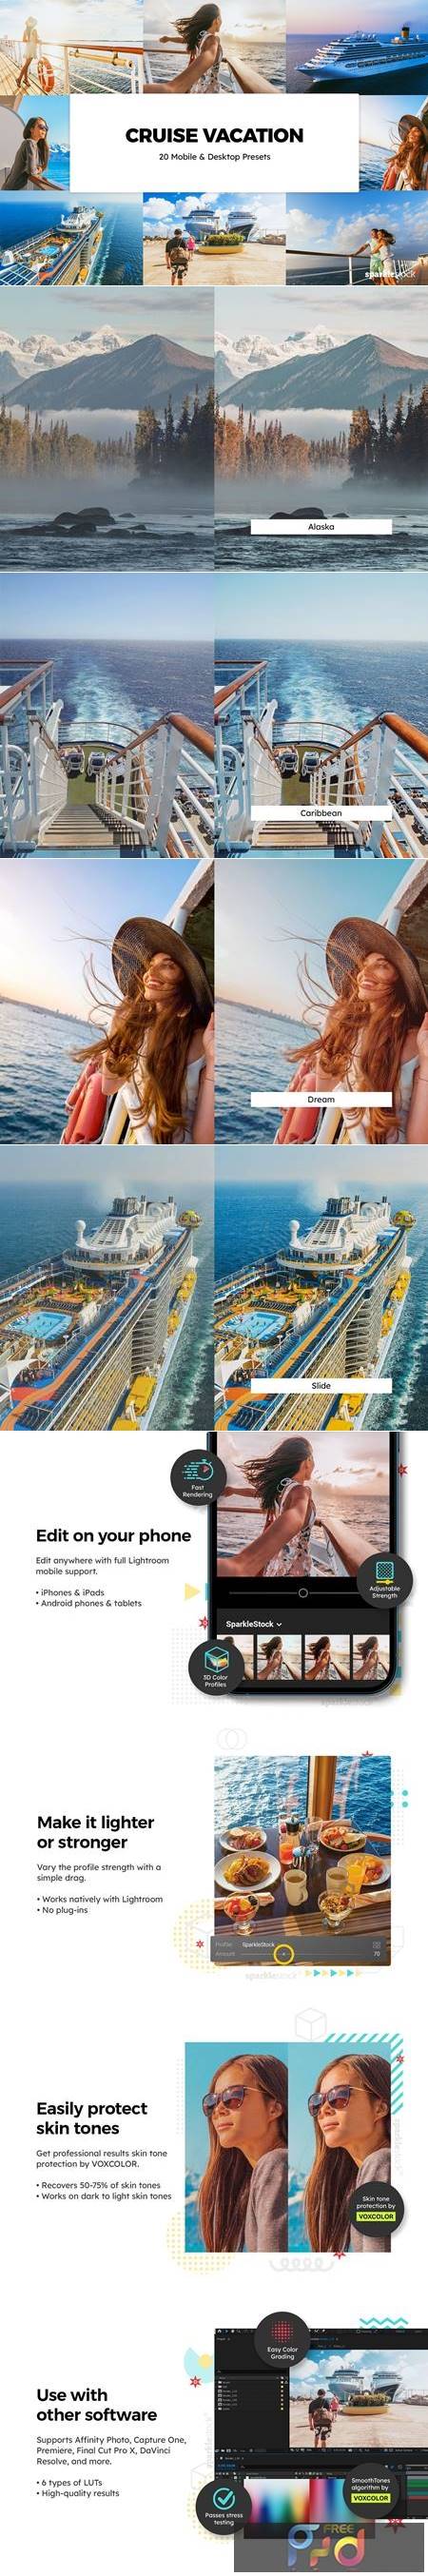 Cruise Vacation Lightroom Presets & LUTs